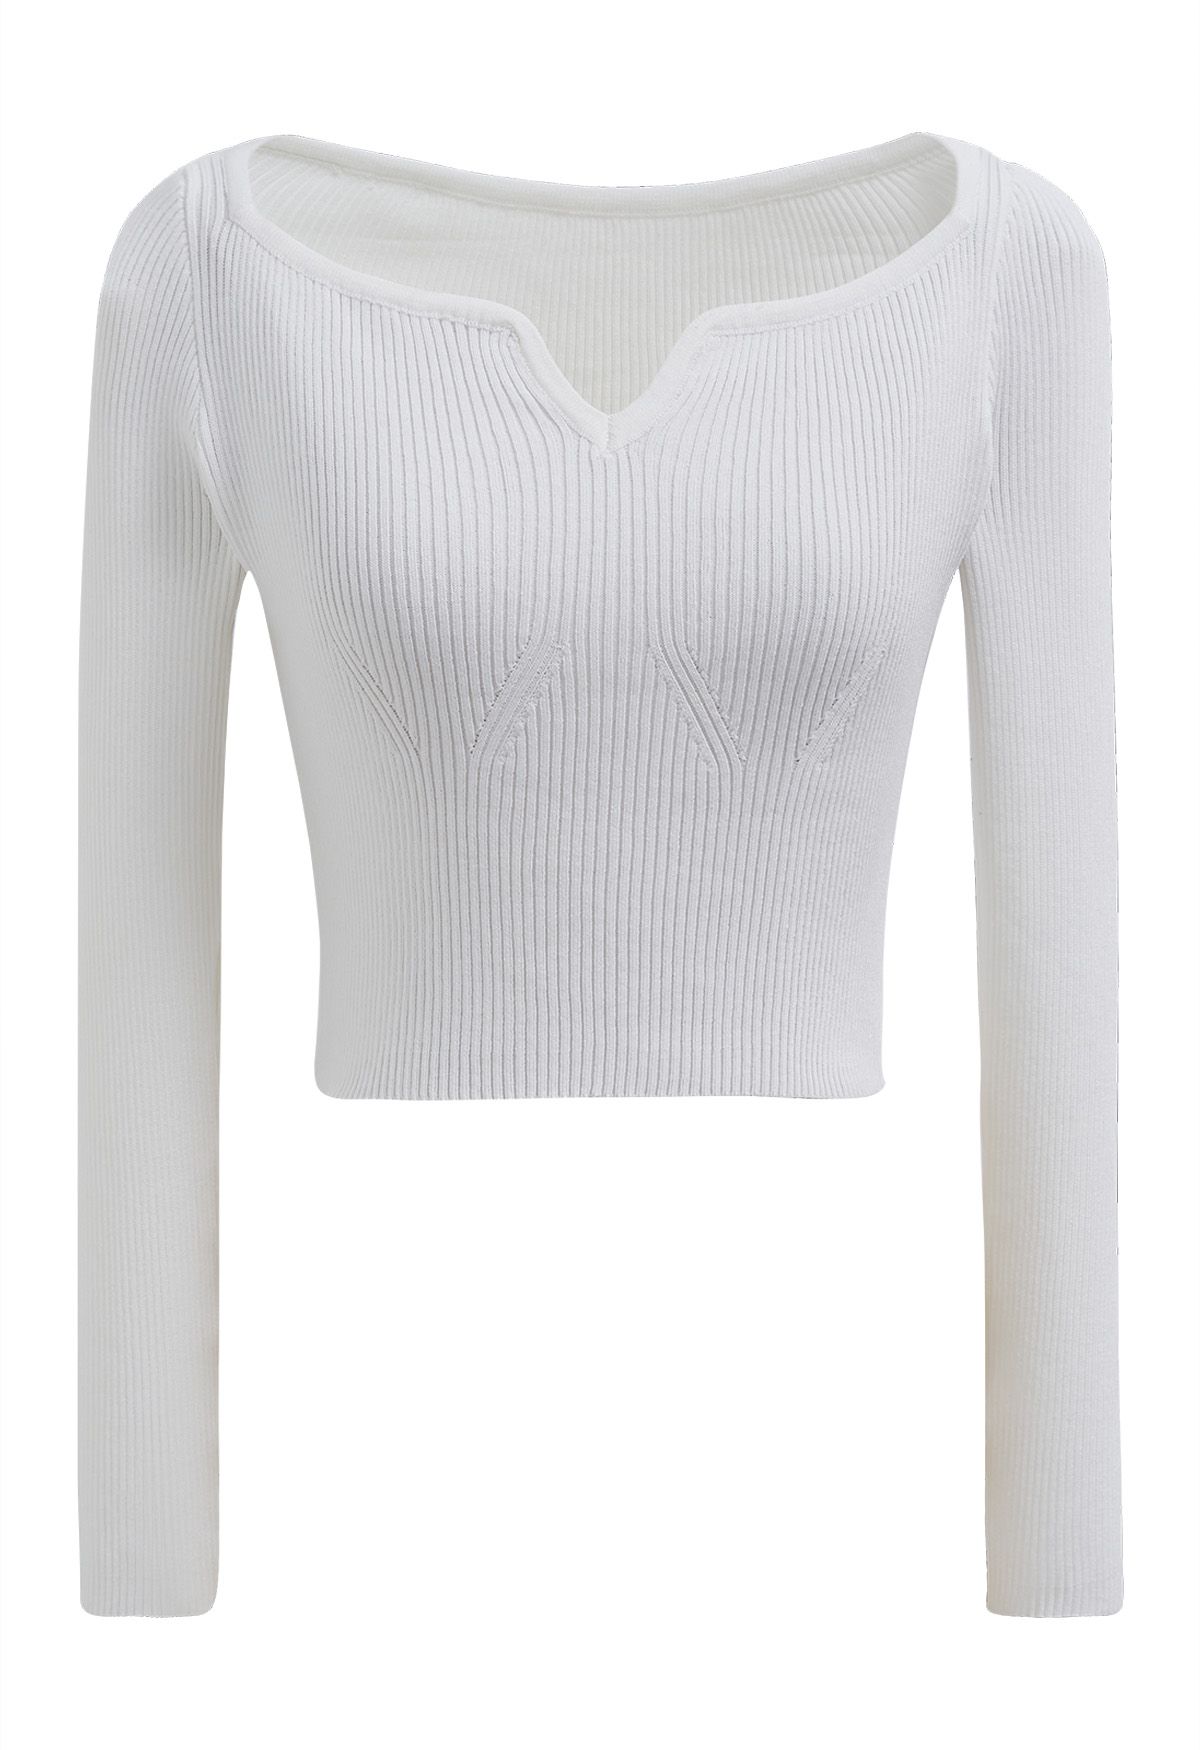 Notched Neckline Ribbed Knit Crop Top in White - Retro, Indie and ...